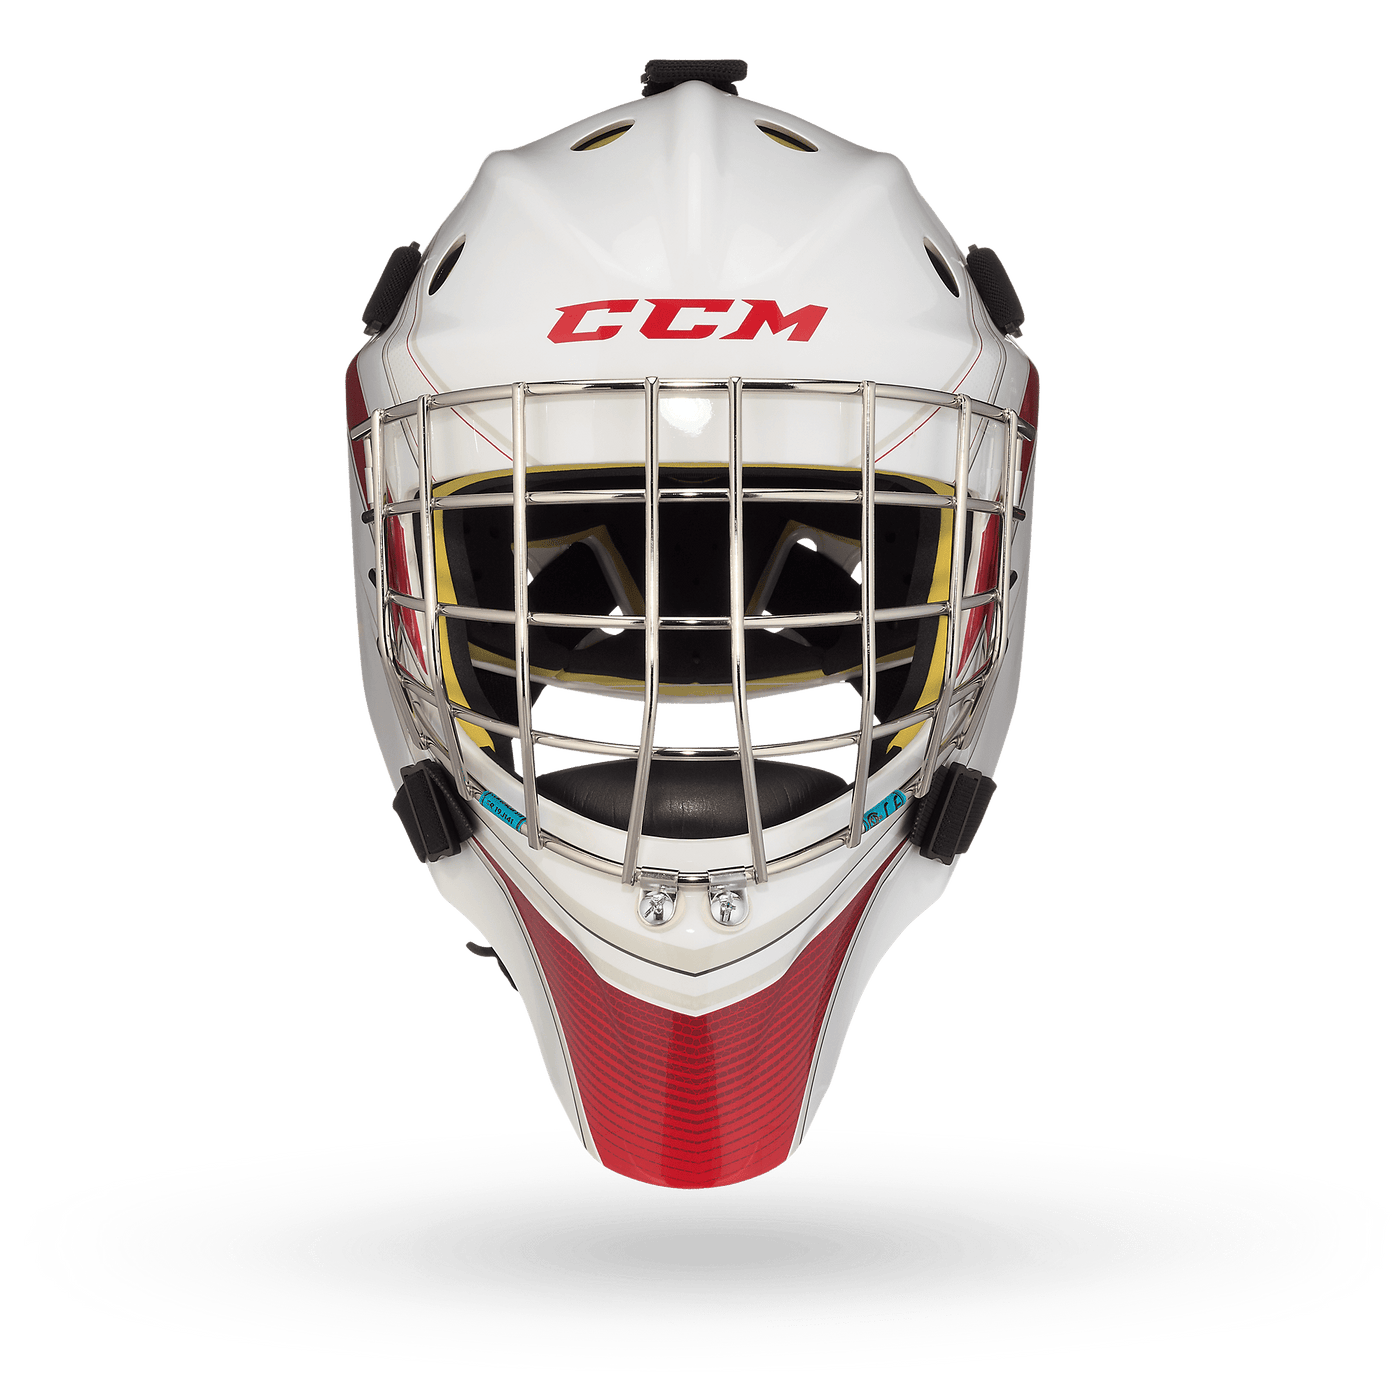 CCM Axis A1.5 Junior Goalie Mask - Decal - The Hockey Shop Source For Sports